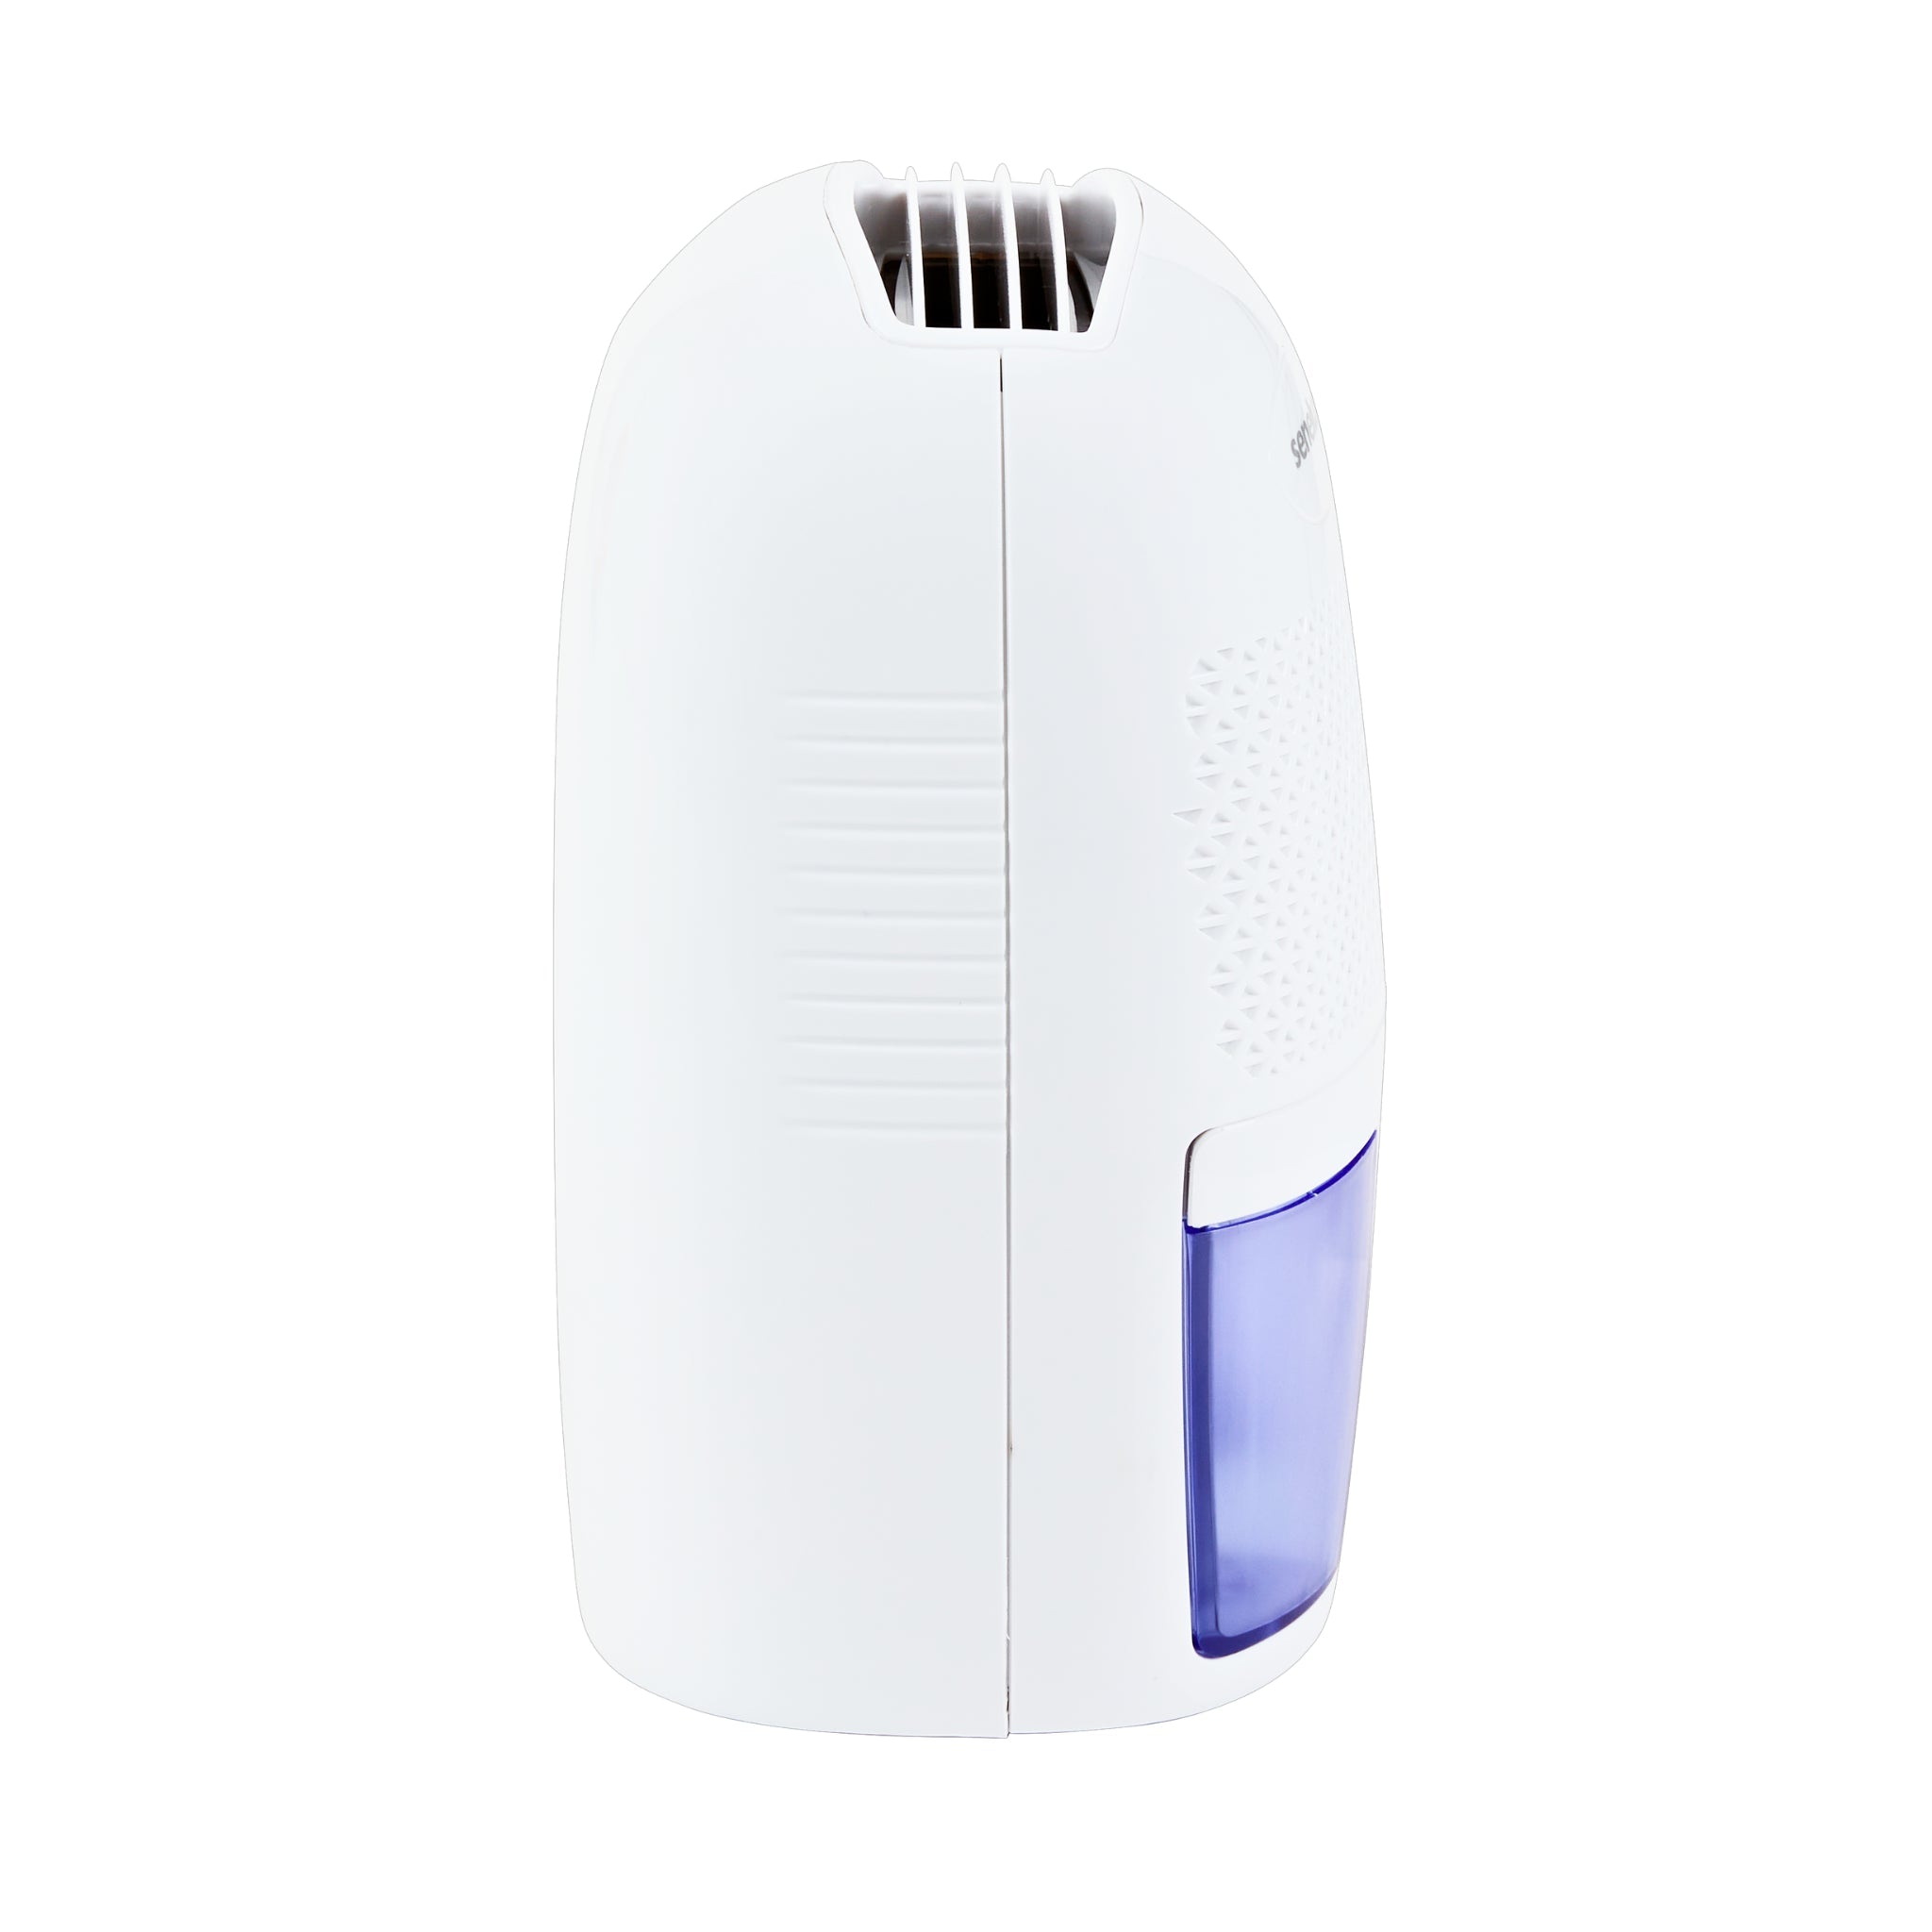 The Senelux mini dehumidifier on the right hand side against a white background.